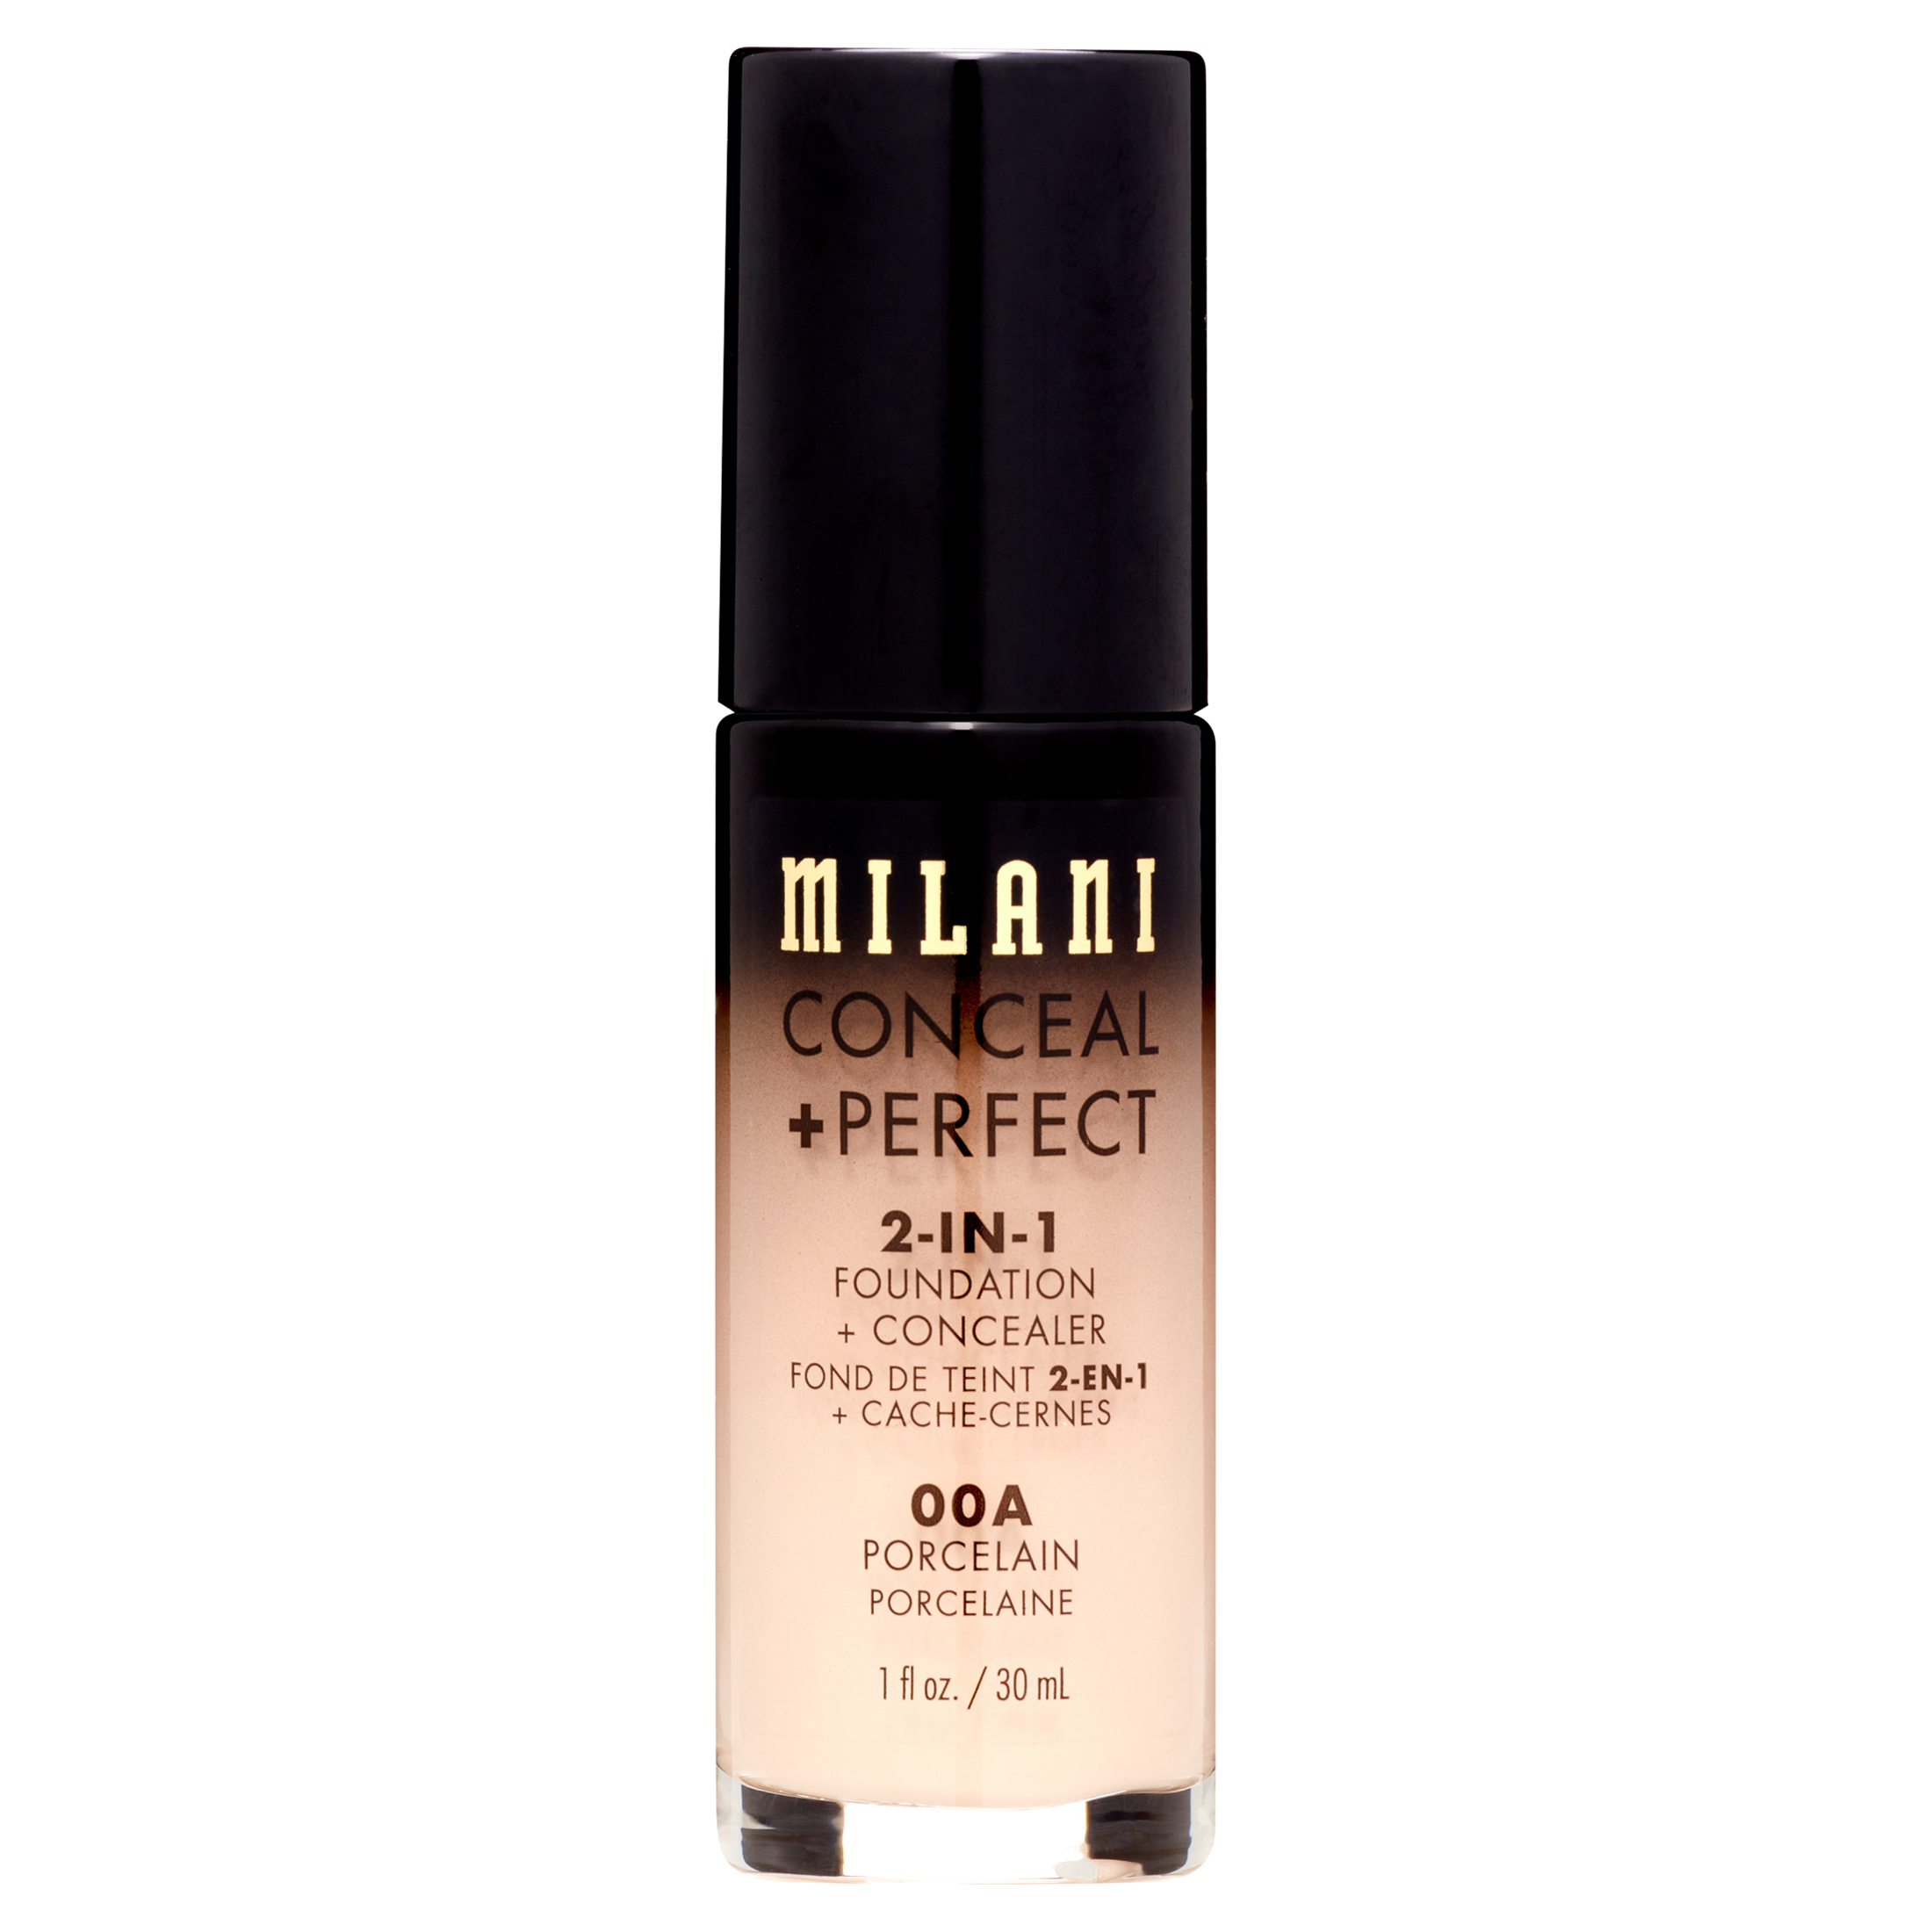 Milani Conceal + Perfect 2-in-1 Foundation + Concealer, Porcelain - image 3 of 7